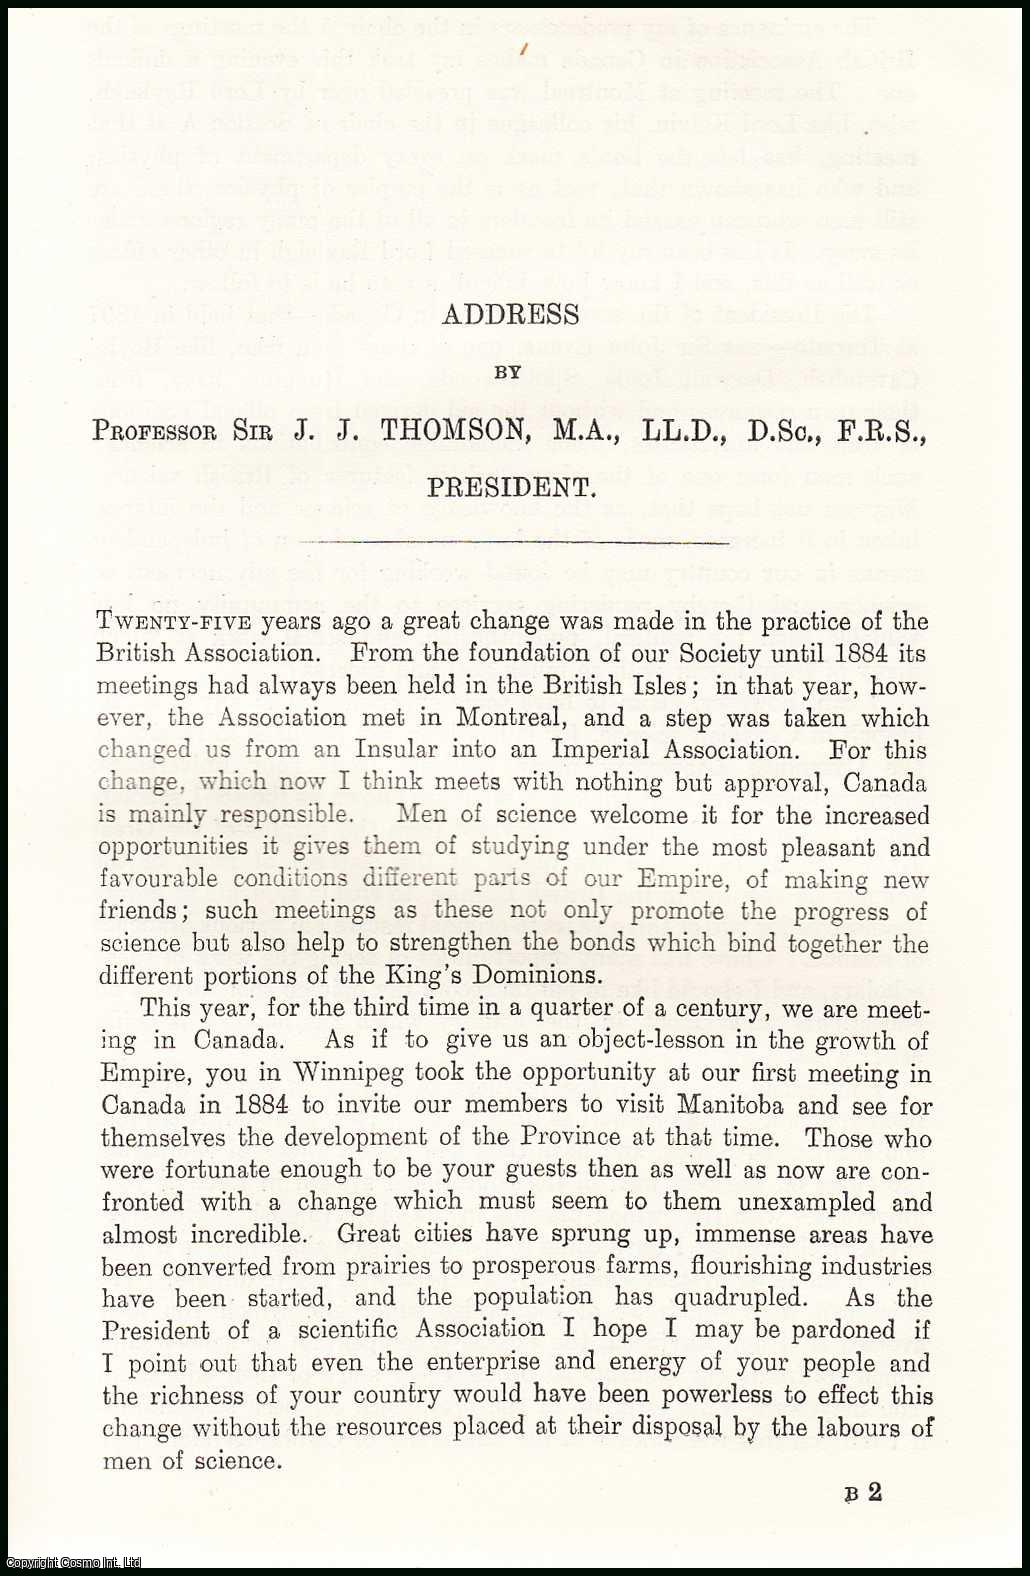 Professor Sir J.J. Thomson, M.A., LL.D., D.Sc., F.R.S., President. - Professor Sir J.J. Thomson, Presidential Address, 1909 to the British Association, Meeting at Winnipeg. An uncommon original article from The British Association for The Advancement of Science report, 1909.